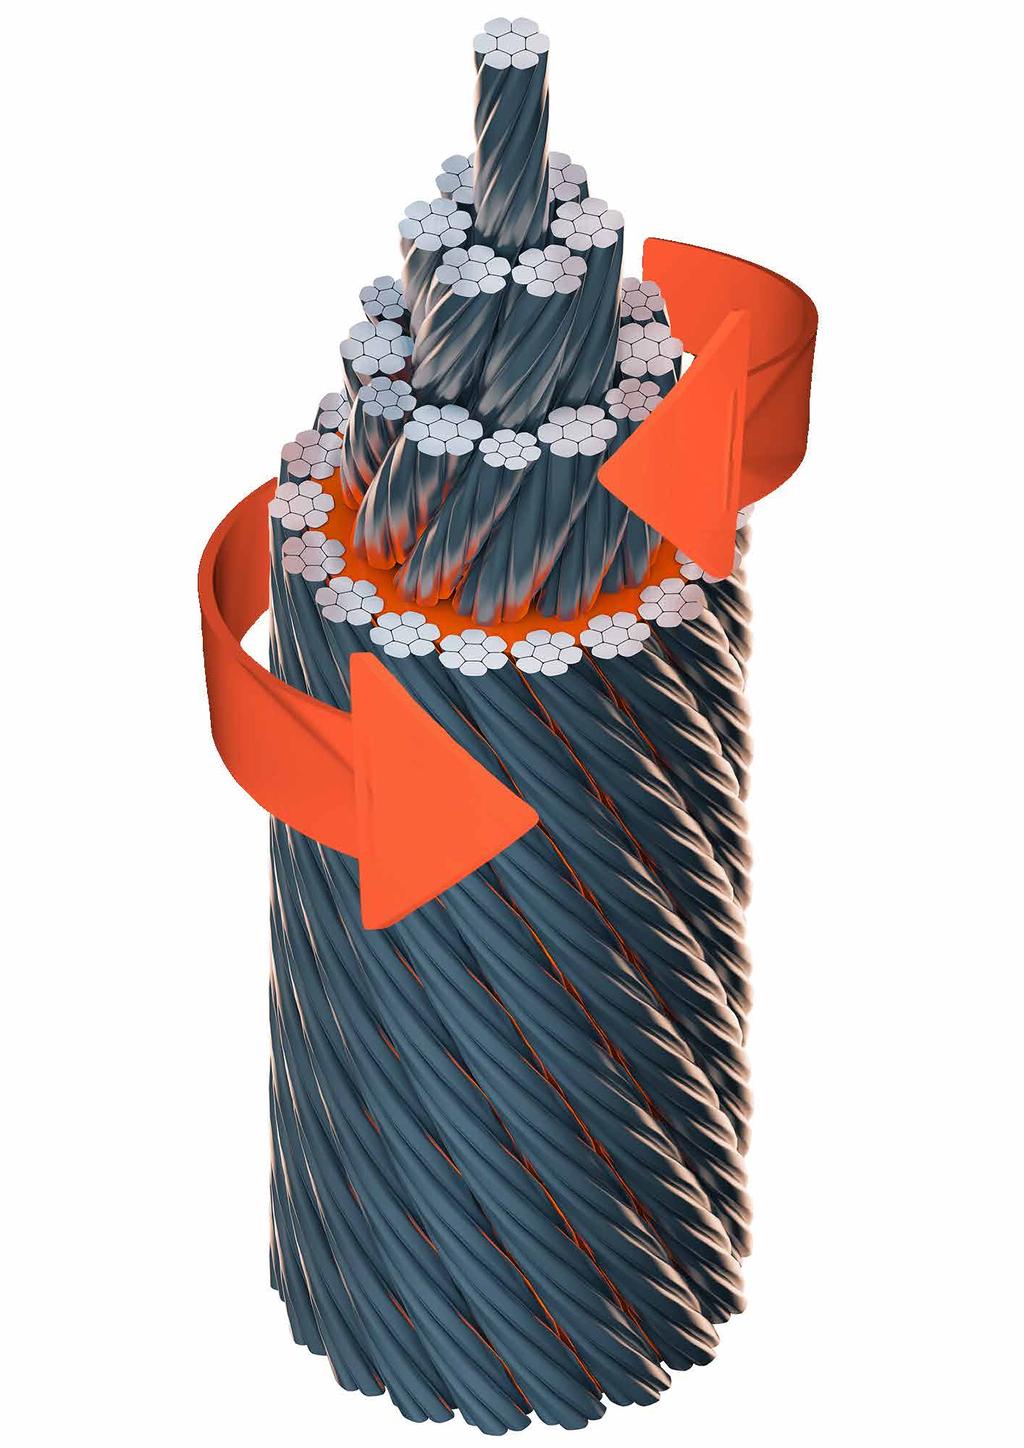 According to ISO 21669 and DIN EN 12385-3: a rope is considered to be rotation resistant if it rotates around its axis at most once at a length of 1000 x d under a load of 20 % of the minimum